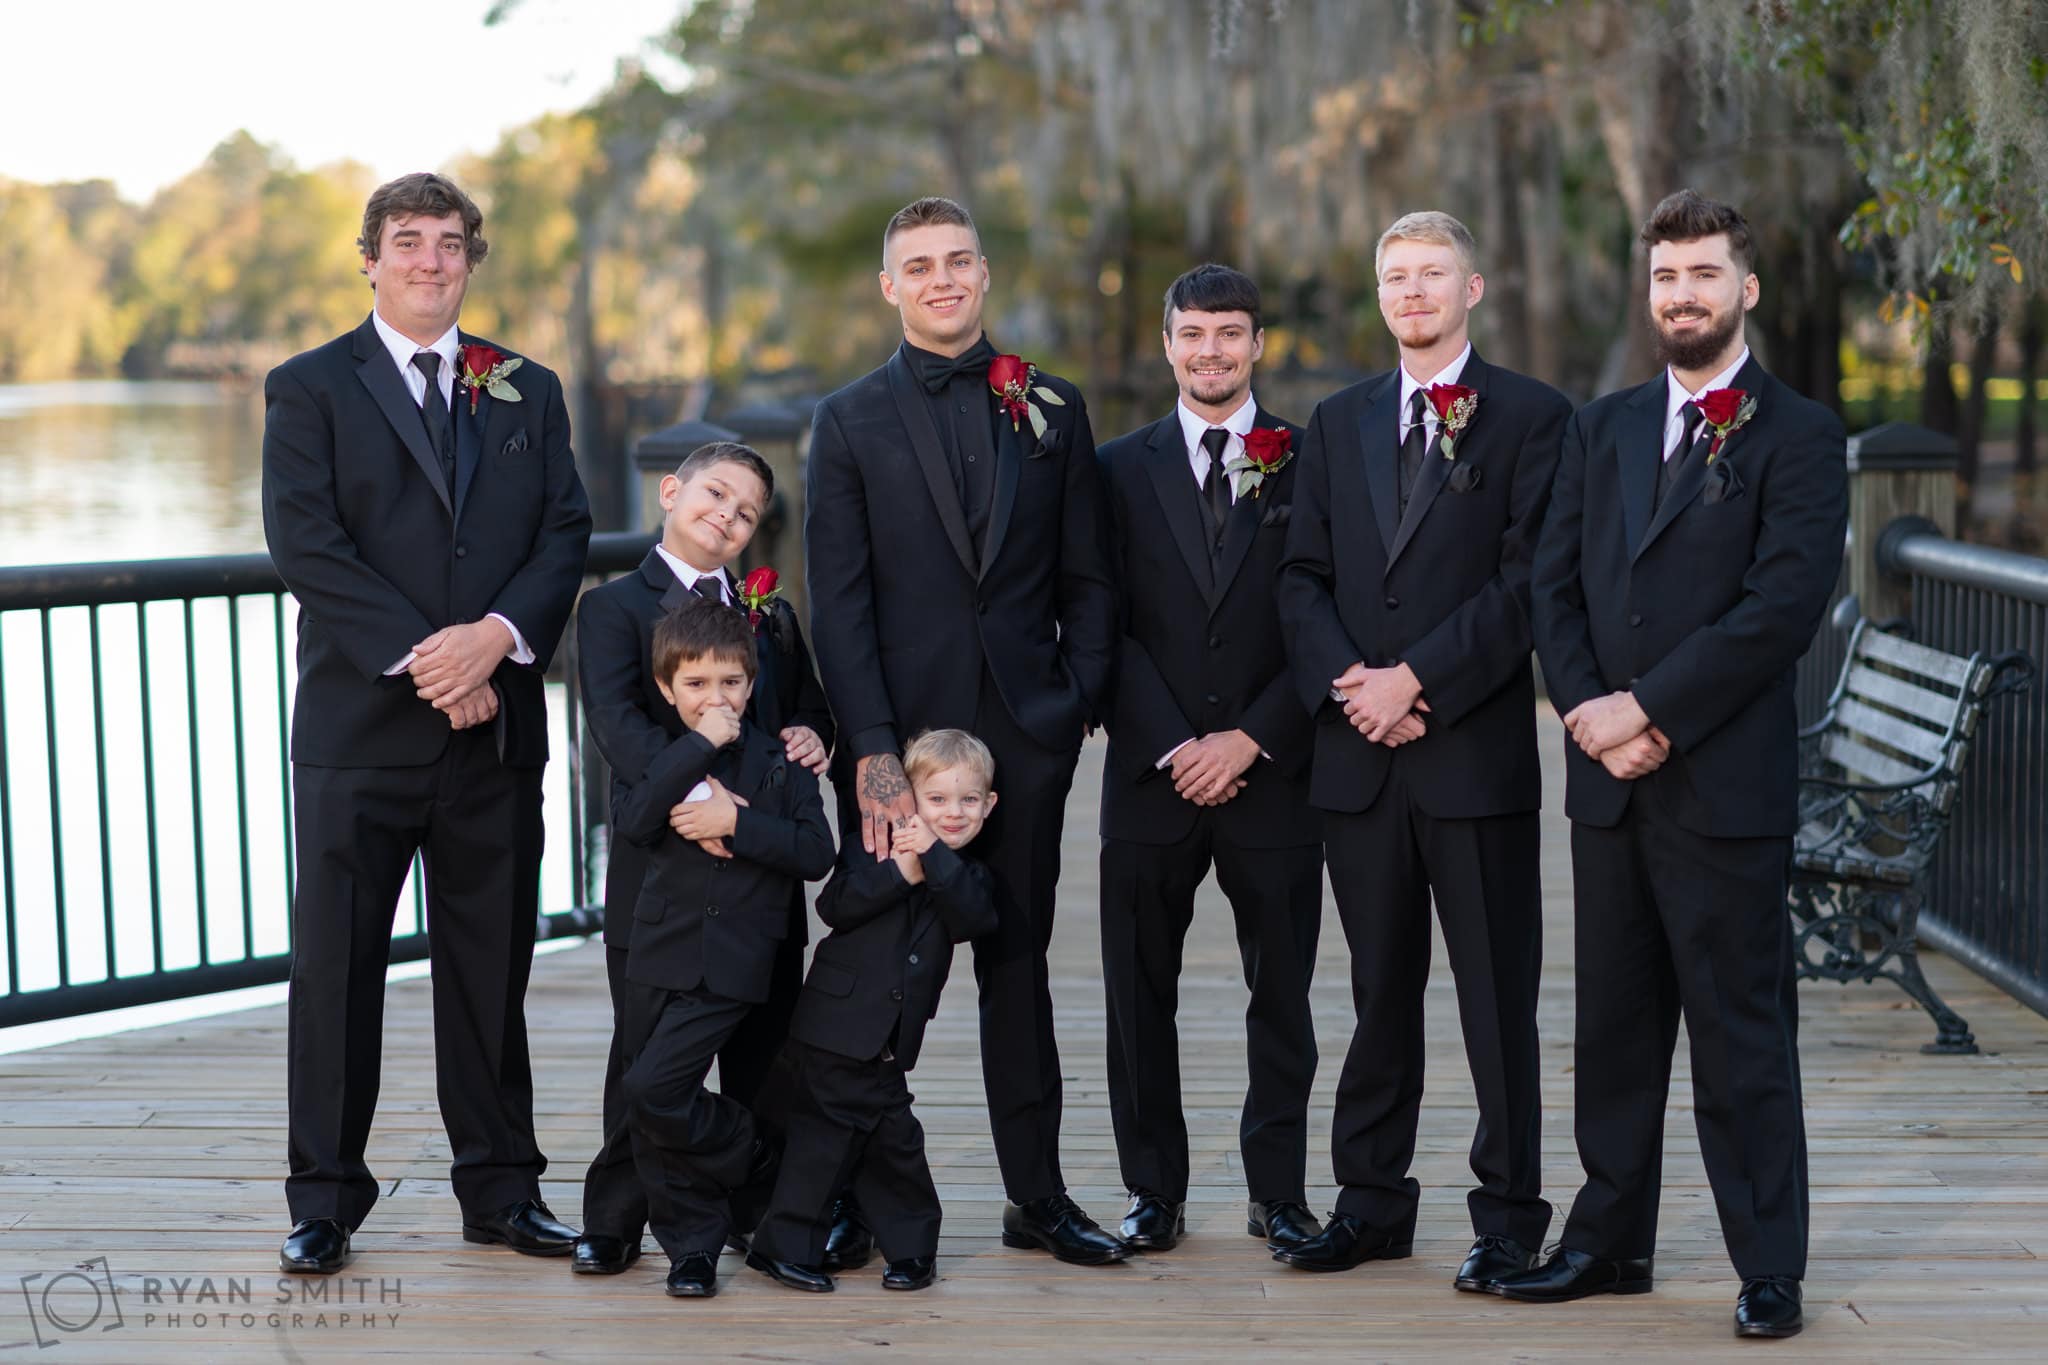 Portrait of the groomsmen together - Conway River Walk